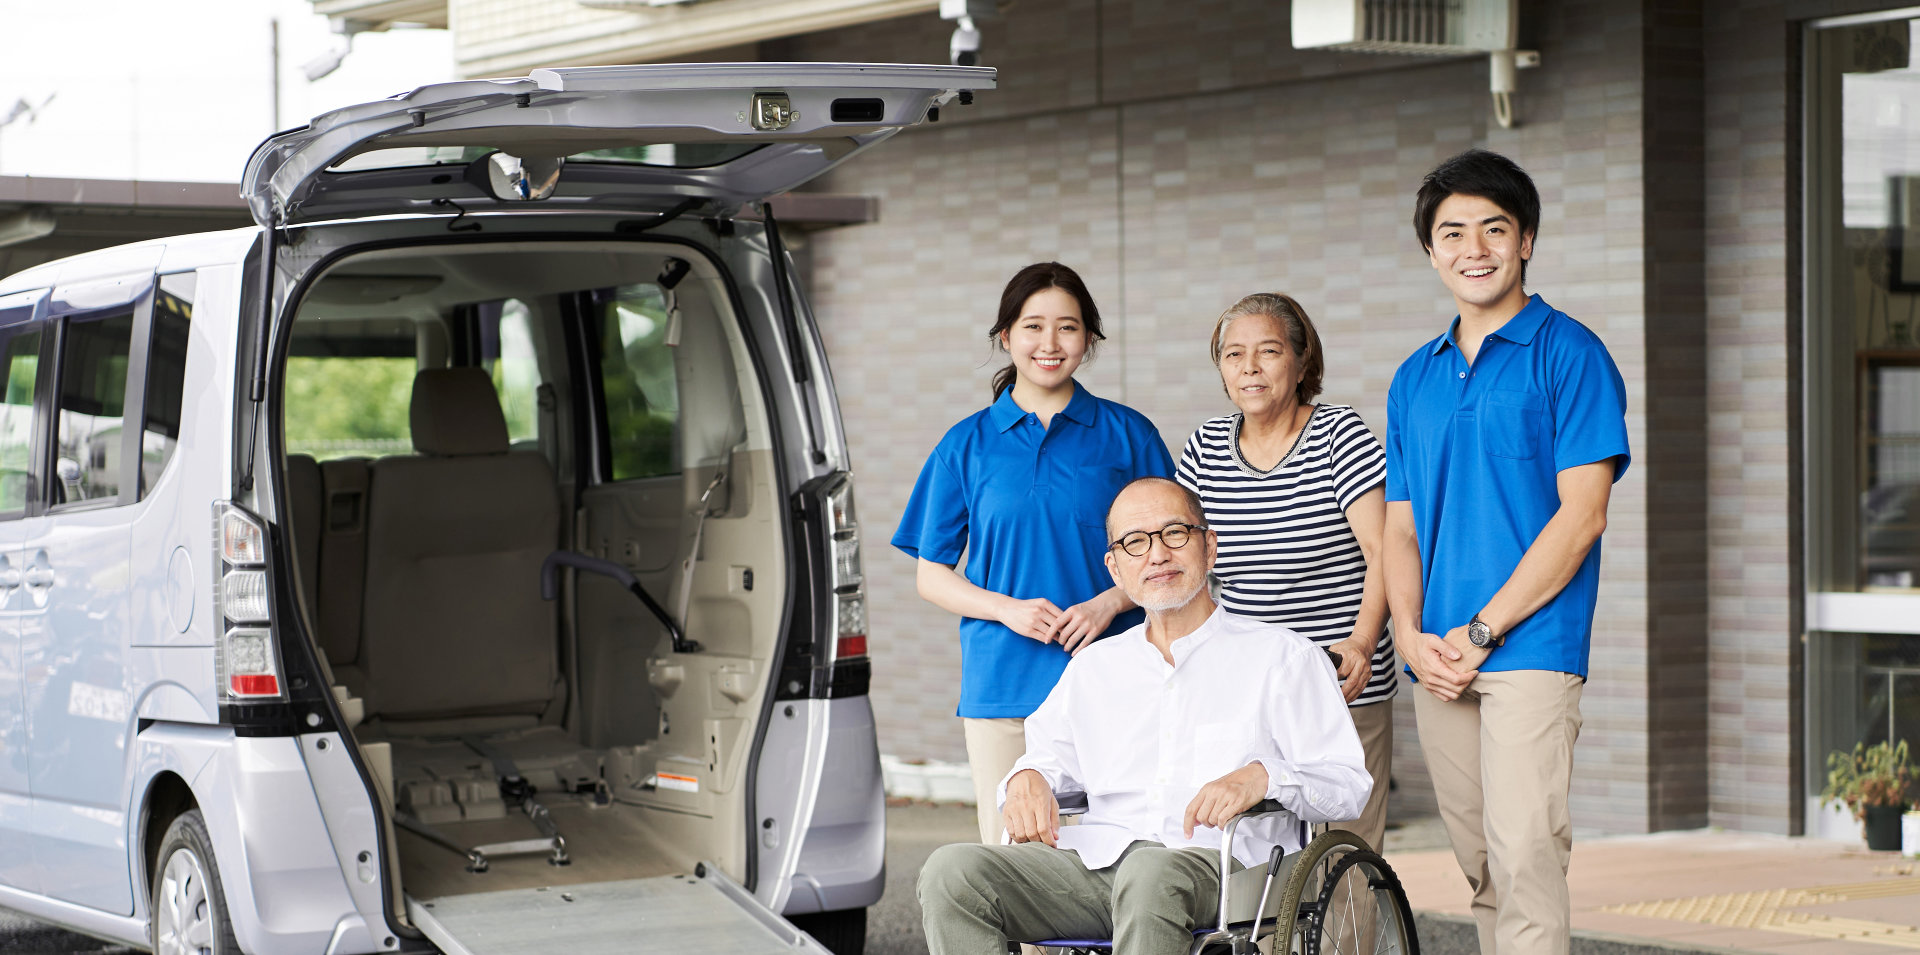 caregivers and their patients preparing to board a van